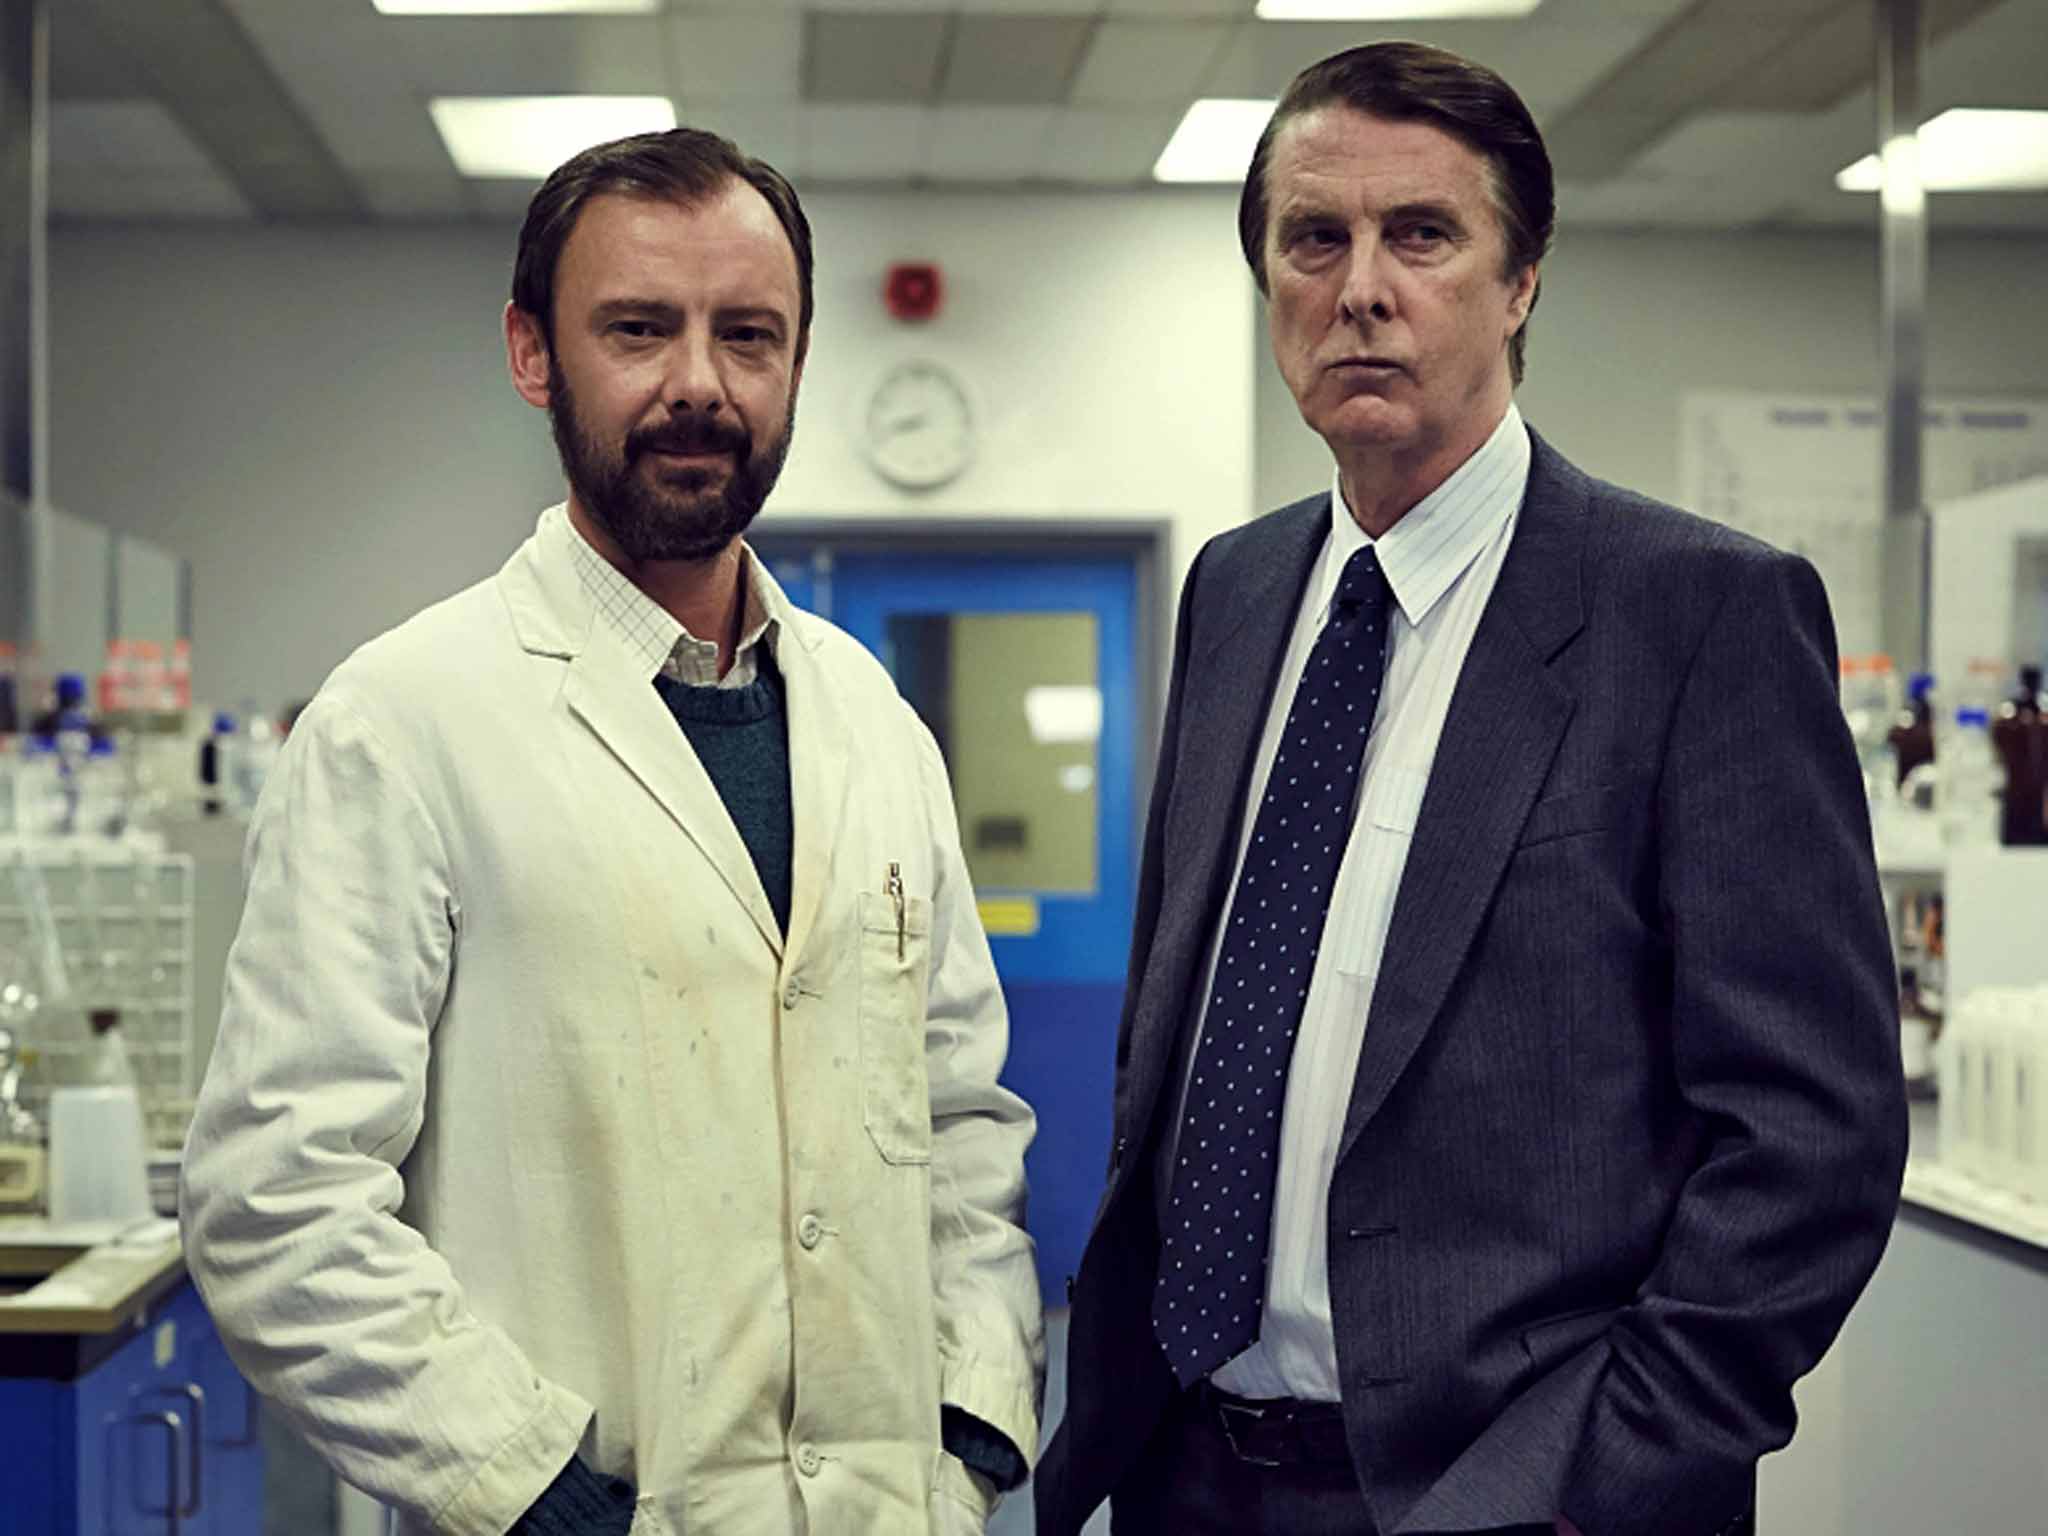 It's all in the genes: John Simm working in tandem with David Threlfall in 'Code of a Killer'